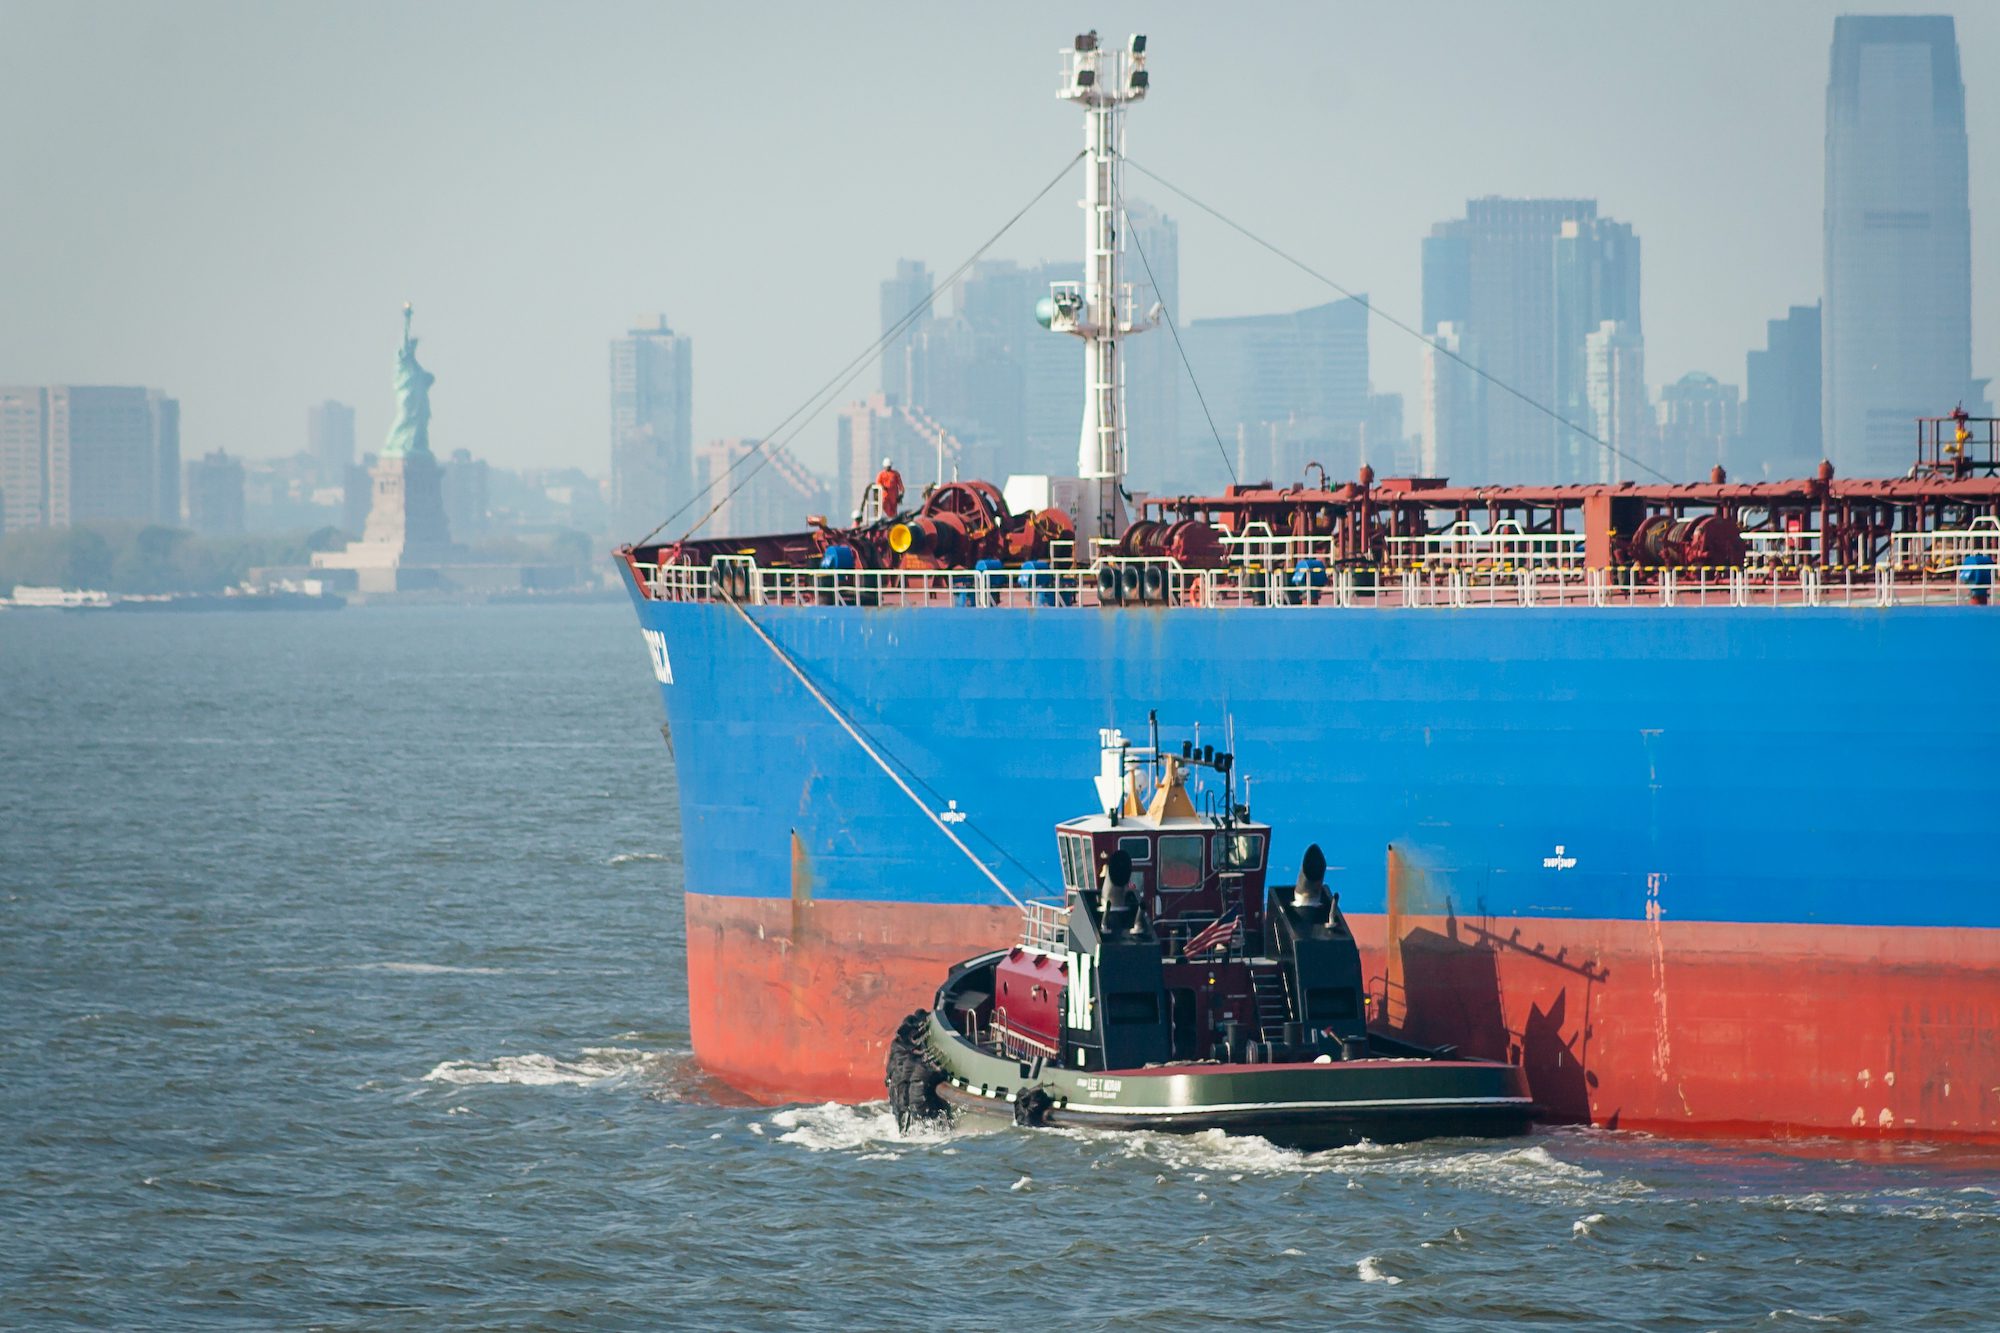 Stock photo of a tanker being escorted by a tug in New York harbor